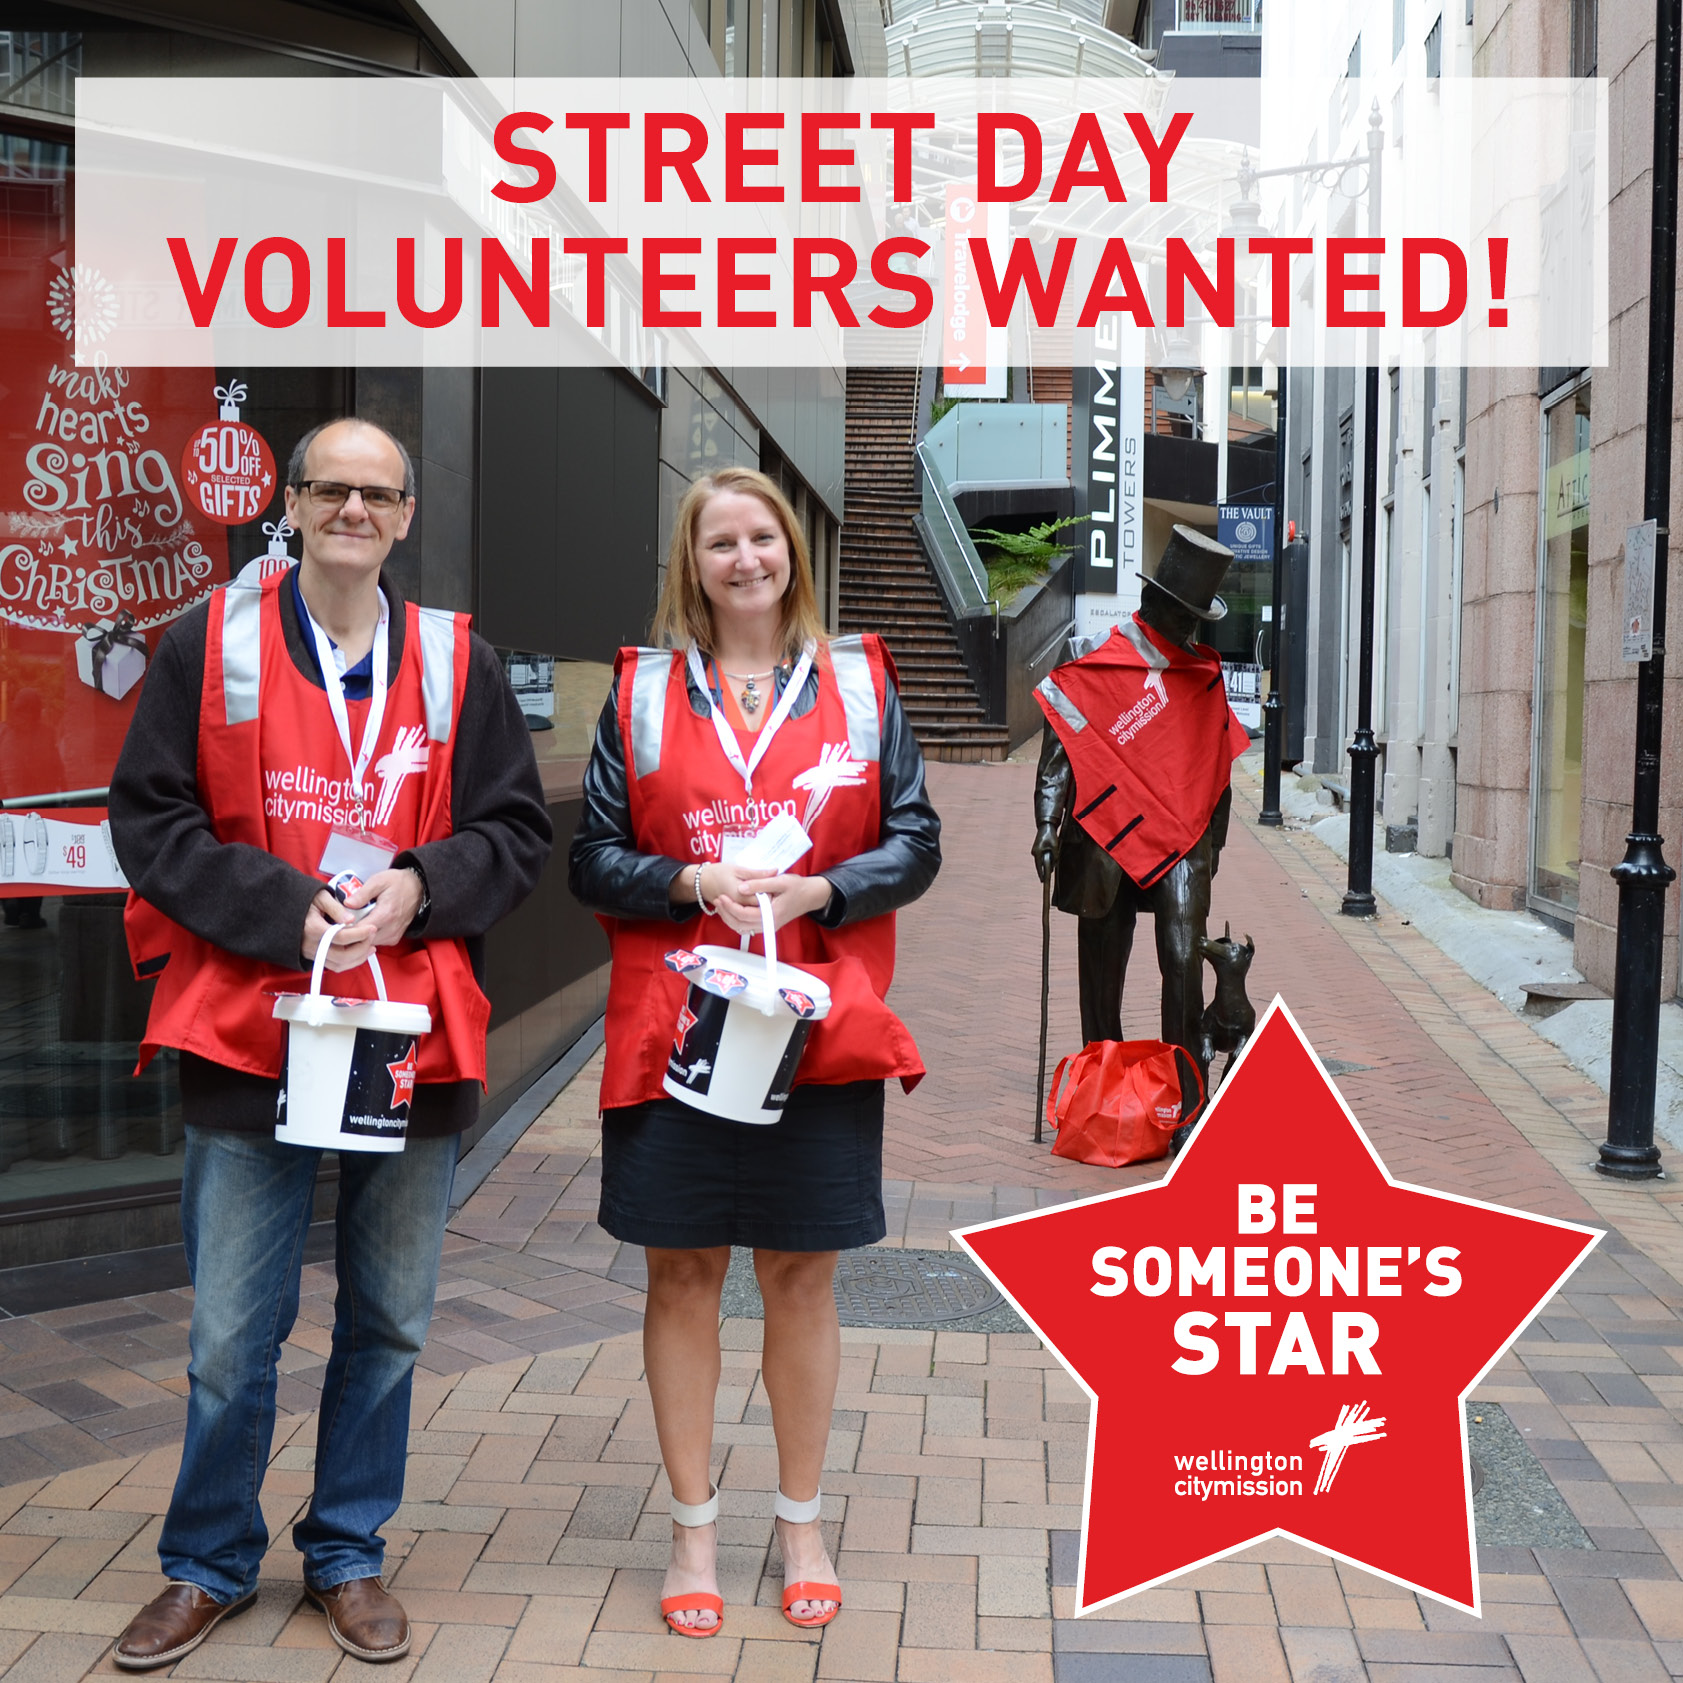 Team Event Volunteering: Be someone's star by volunteering at the Wellington City Mission Street Day